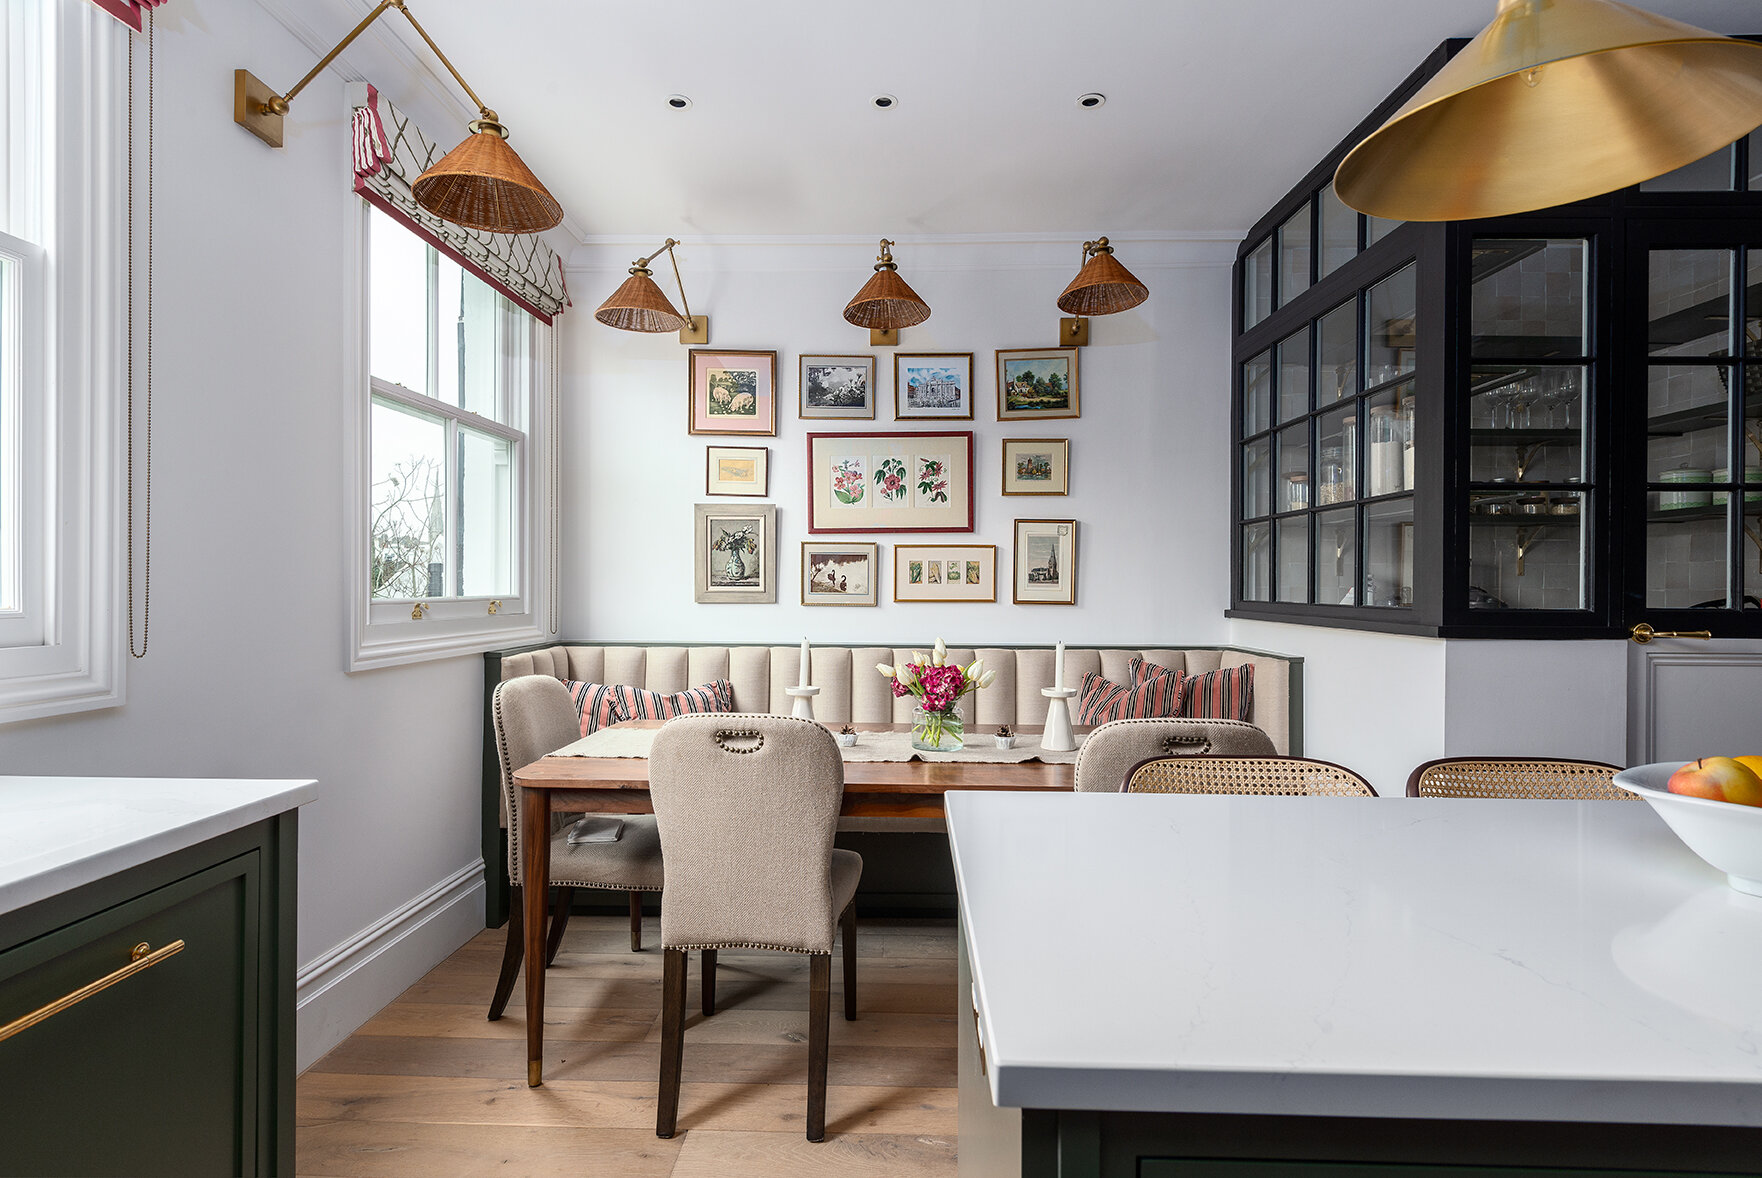 Kitchen Trends: Banquette Seating